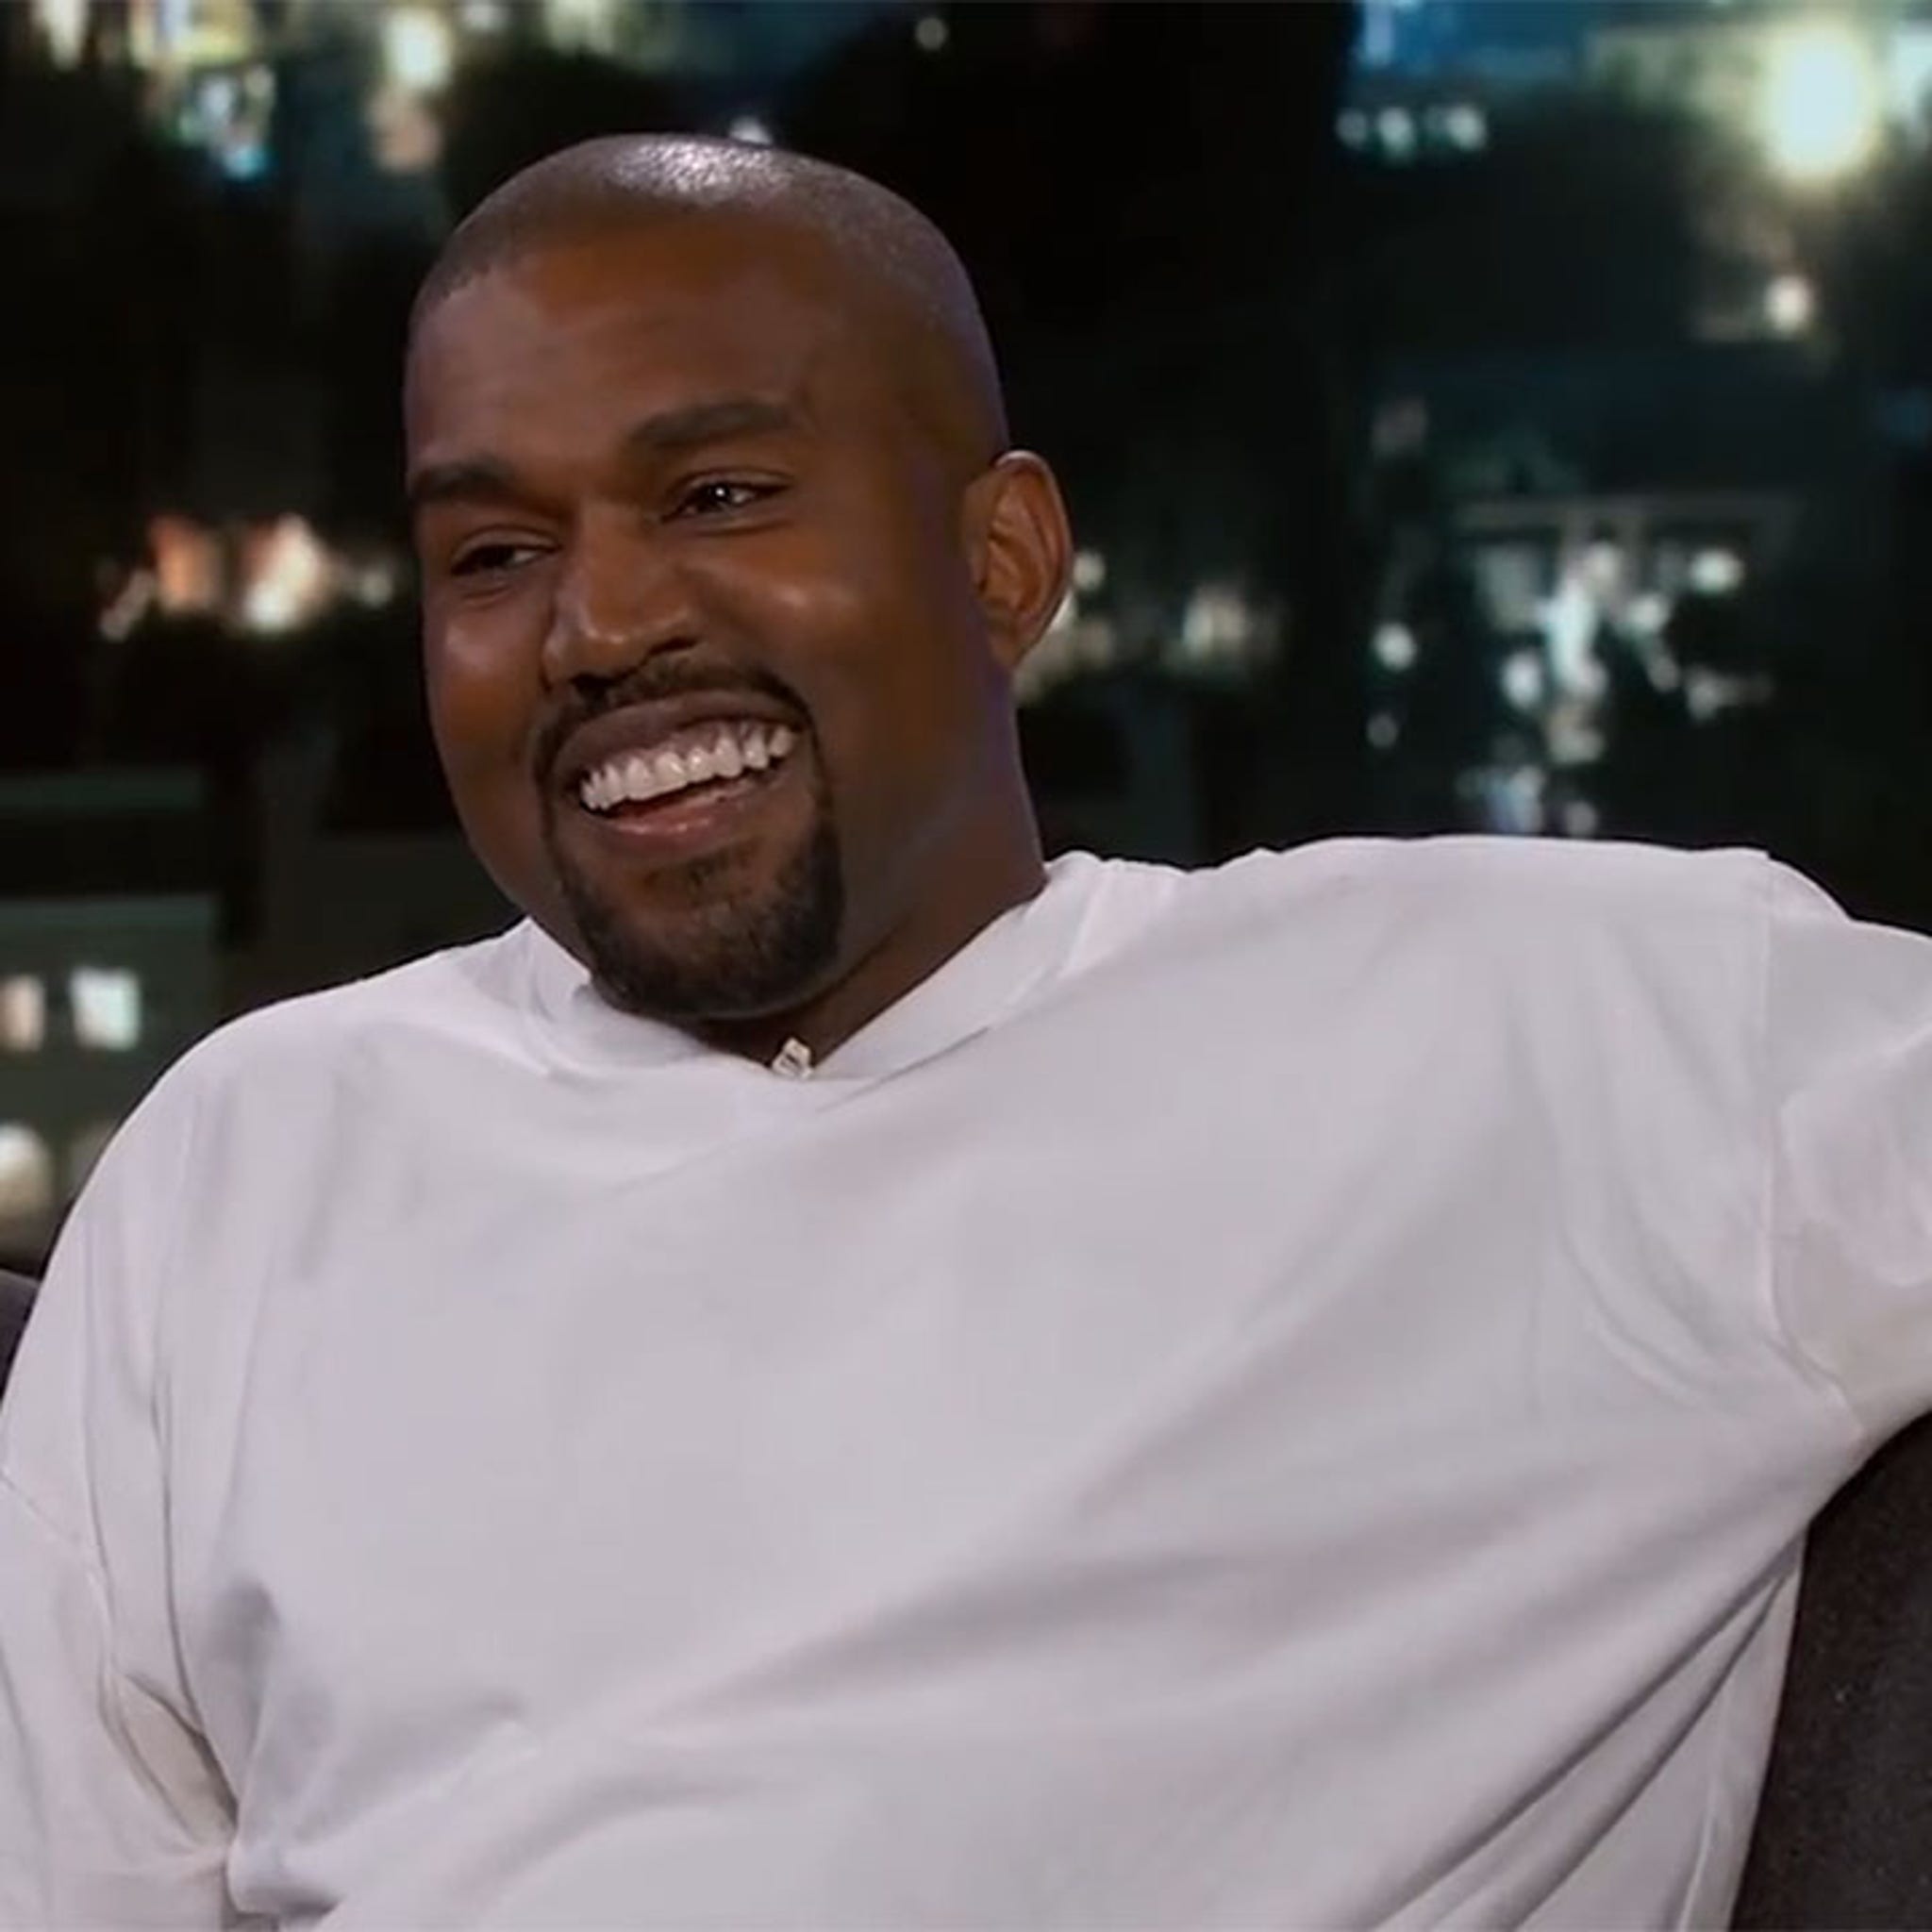 Xxx Www Video 2018 - Kanye West Offered Porn Deal After Porn Site Shout-Out on 'Jimmy Kimmel'